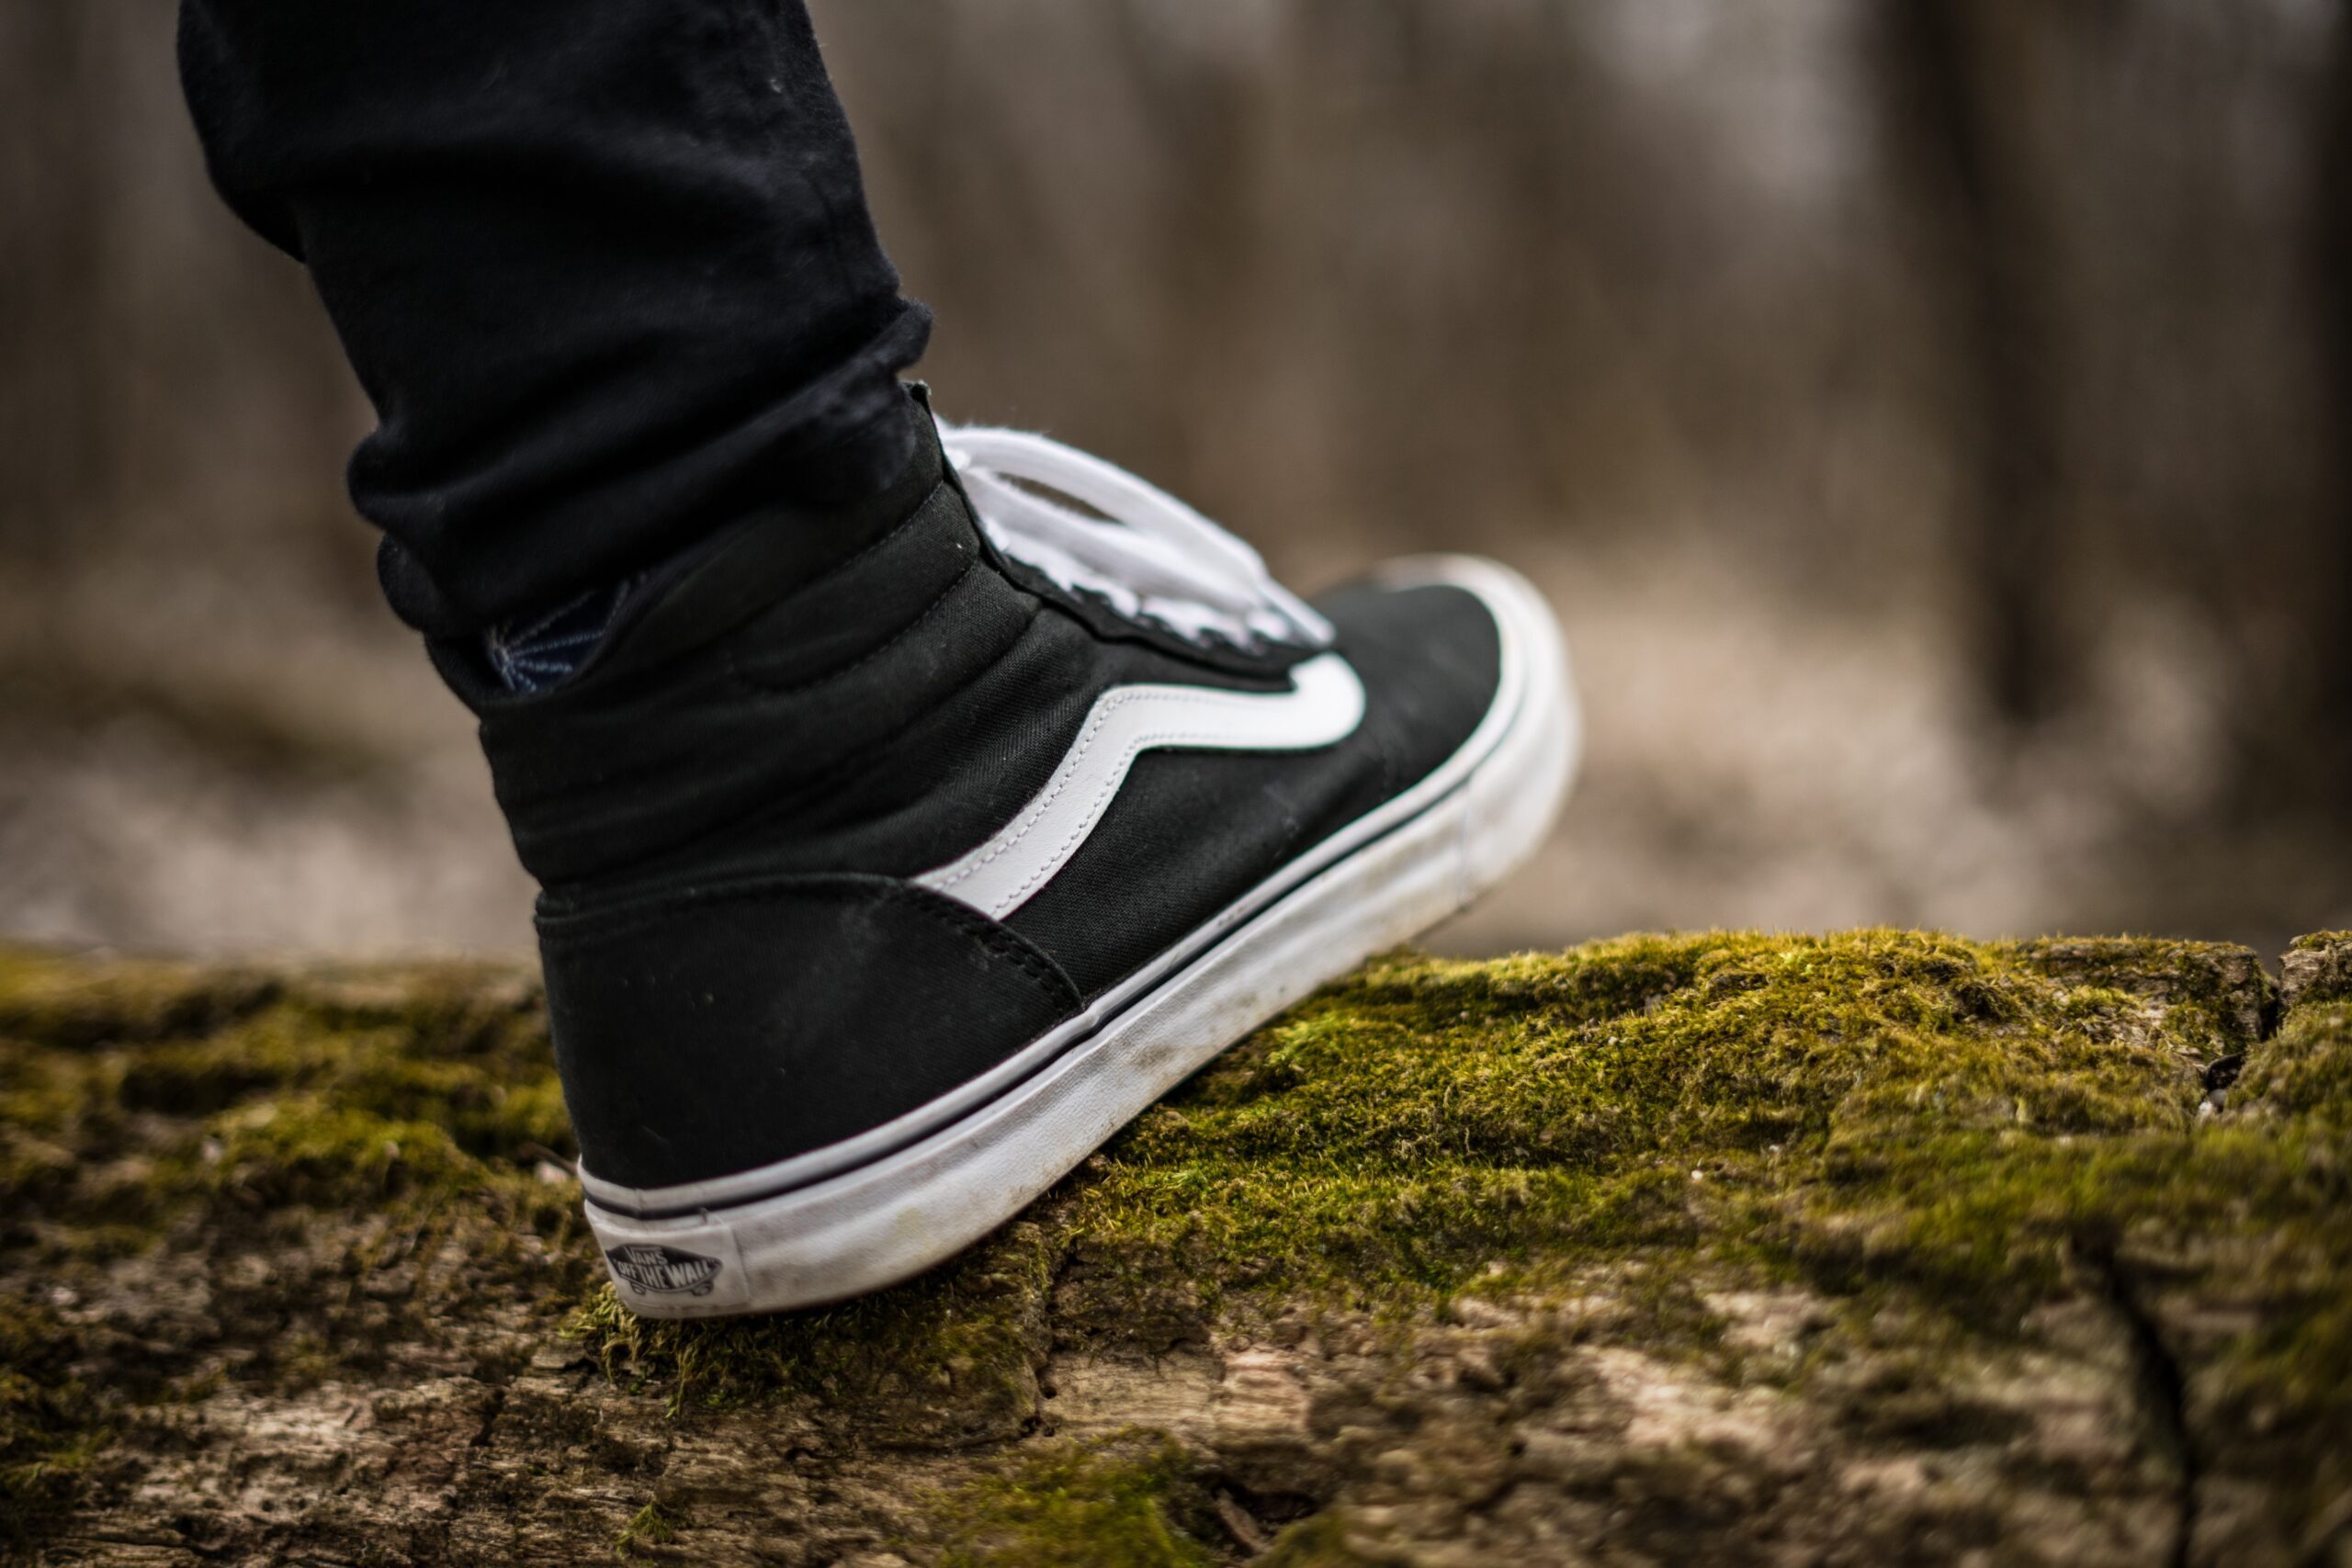 What Are The Key Considerations For Choosing The Right Skateboarding Shoes?